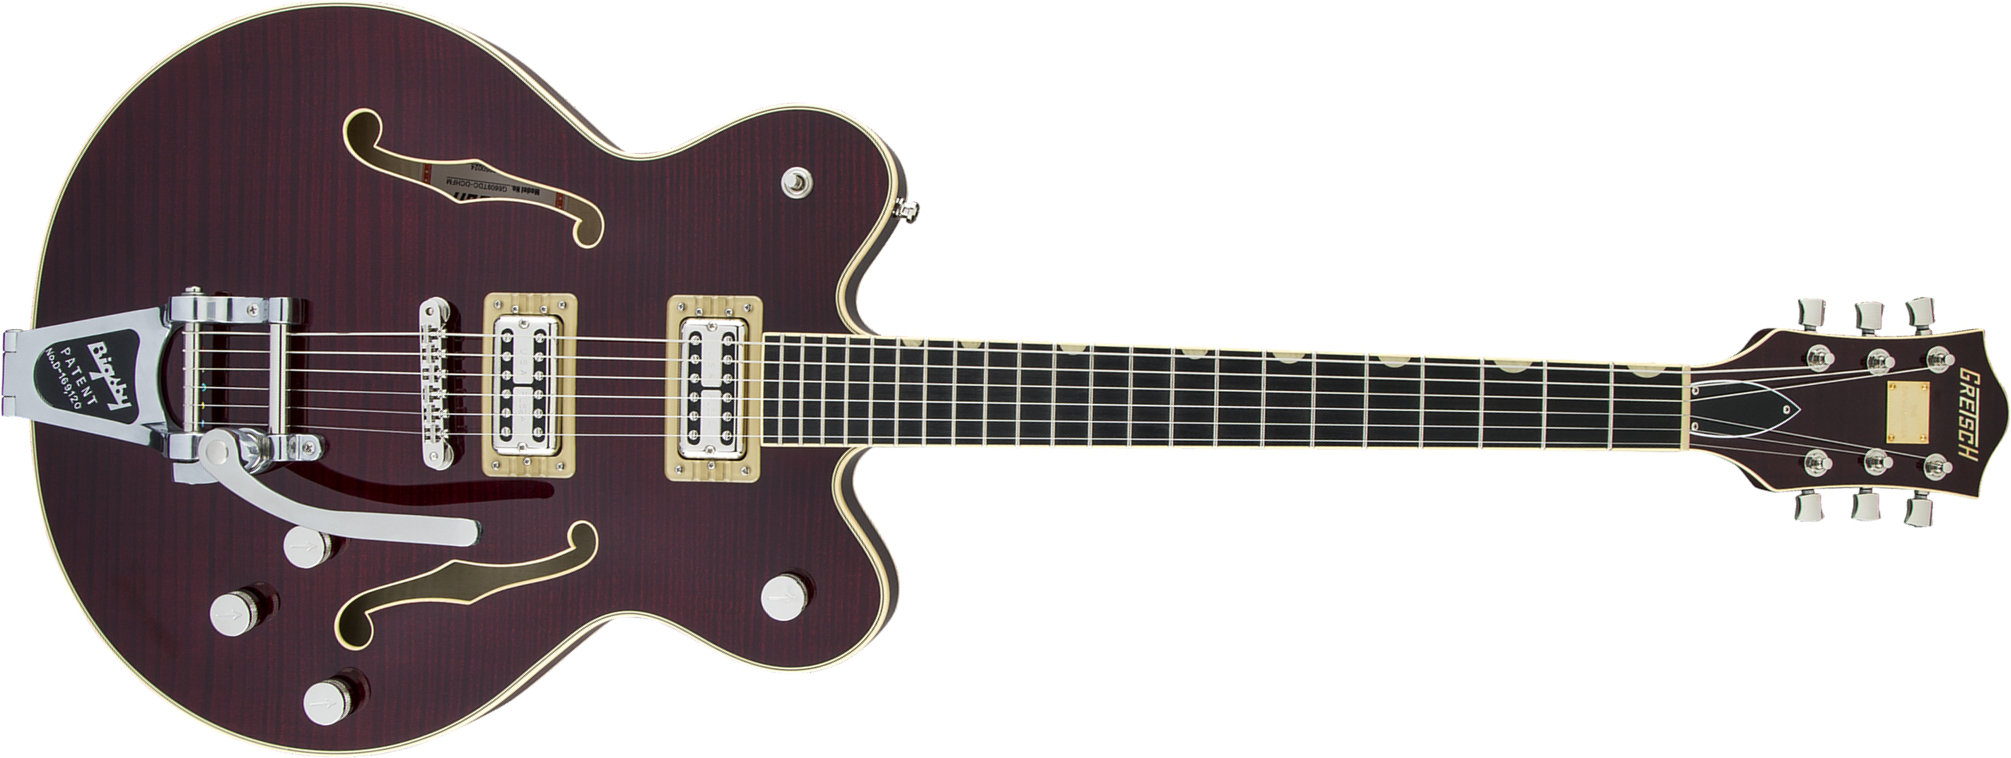 Gretsch G6609tfm Broadkaster Center Bloc Dc Players Edition Pro Jap Bigsby Eb - Dark Cherry Stain - Semi-hollow electric guitar - Main picture